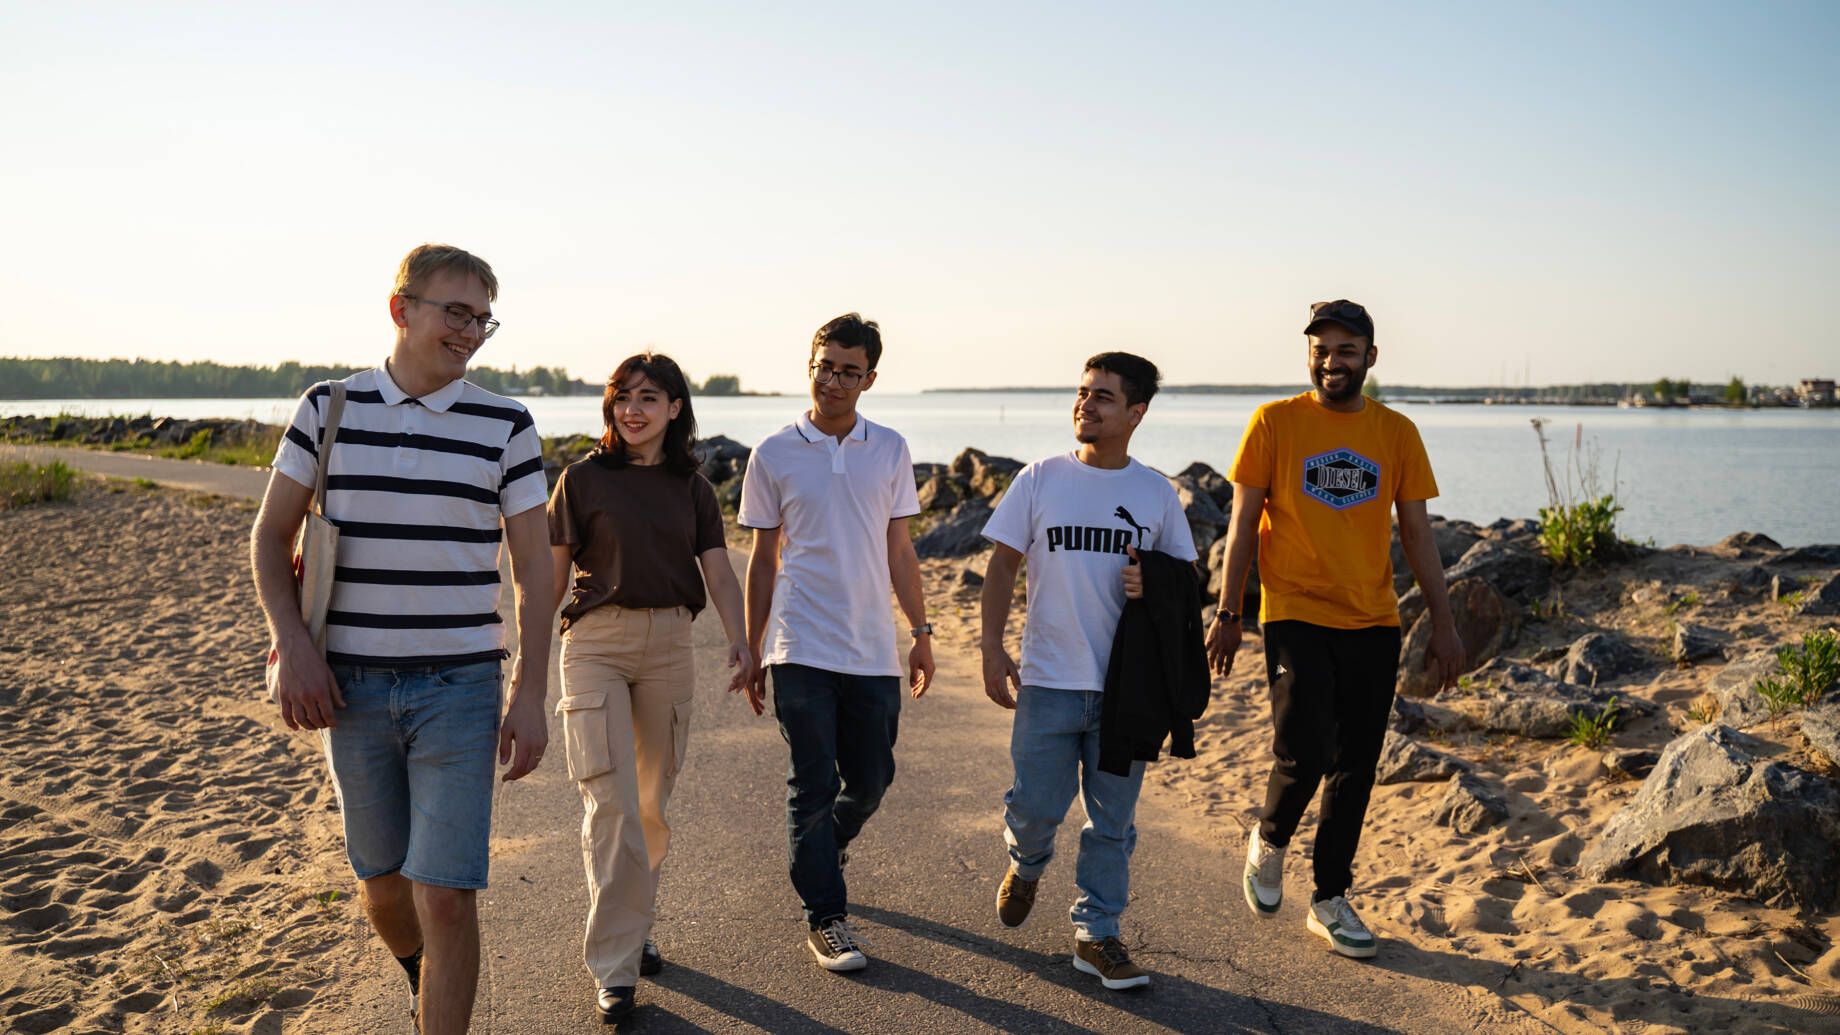 Group of students pictured walking in Kokkola seapark during summer